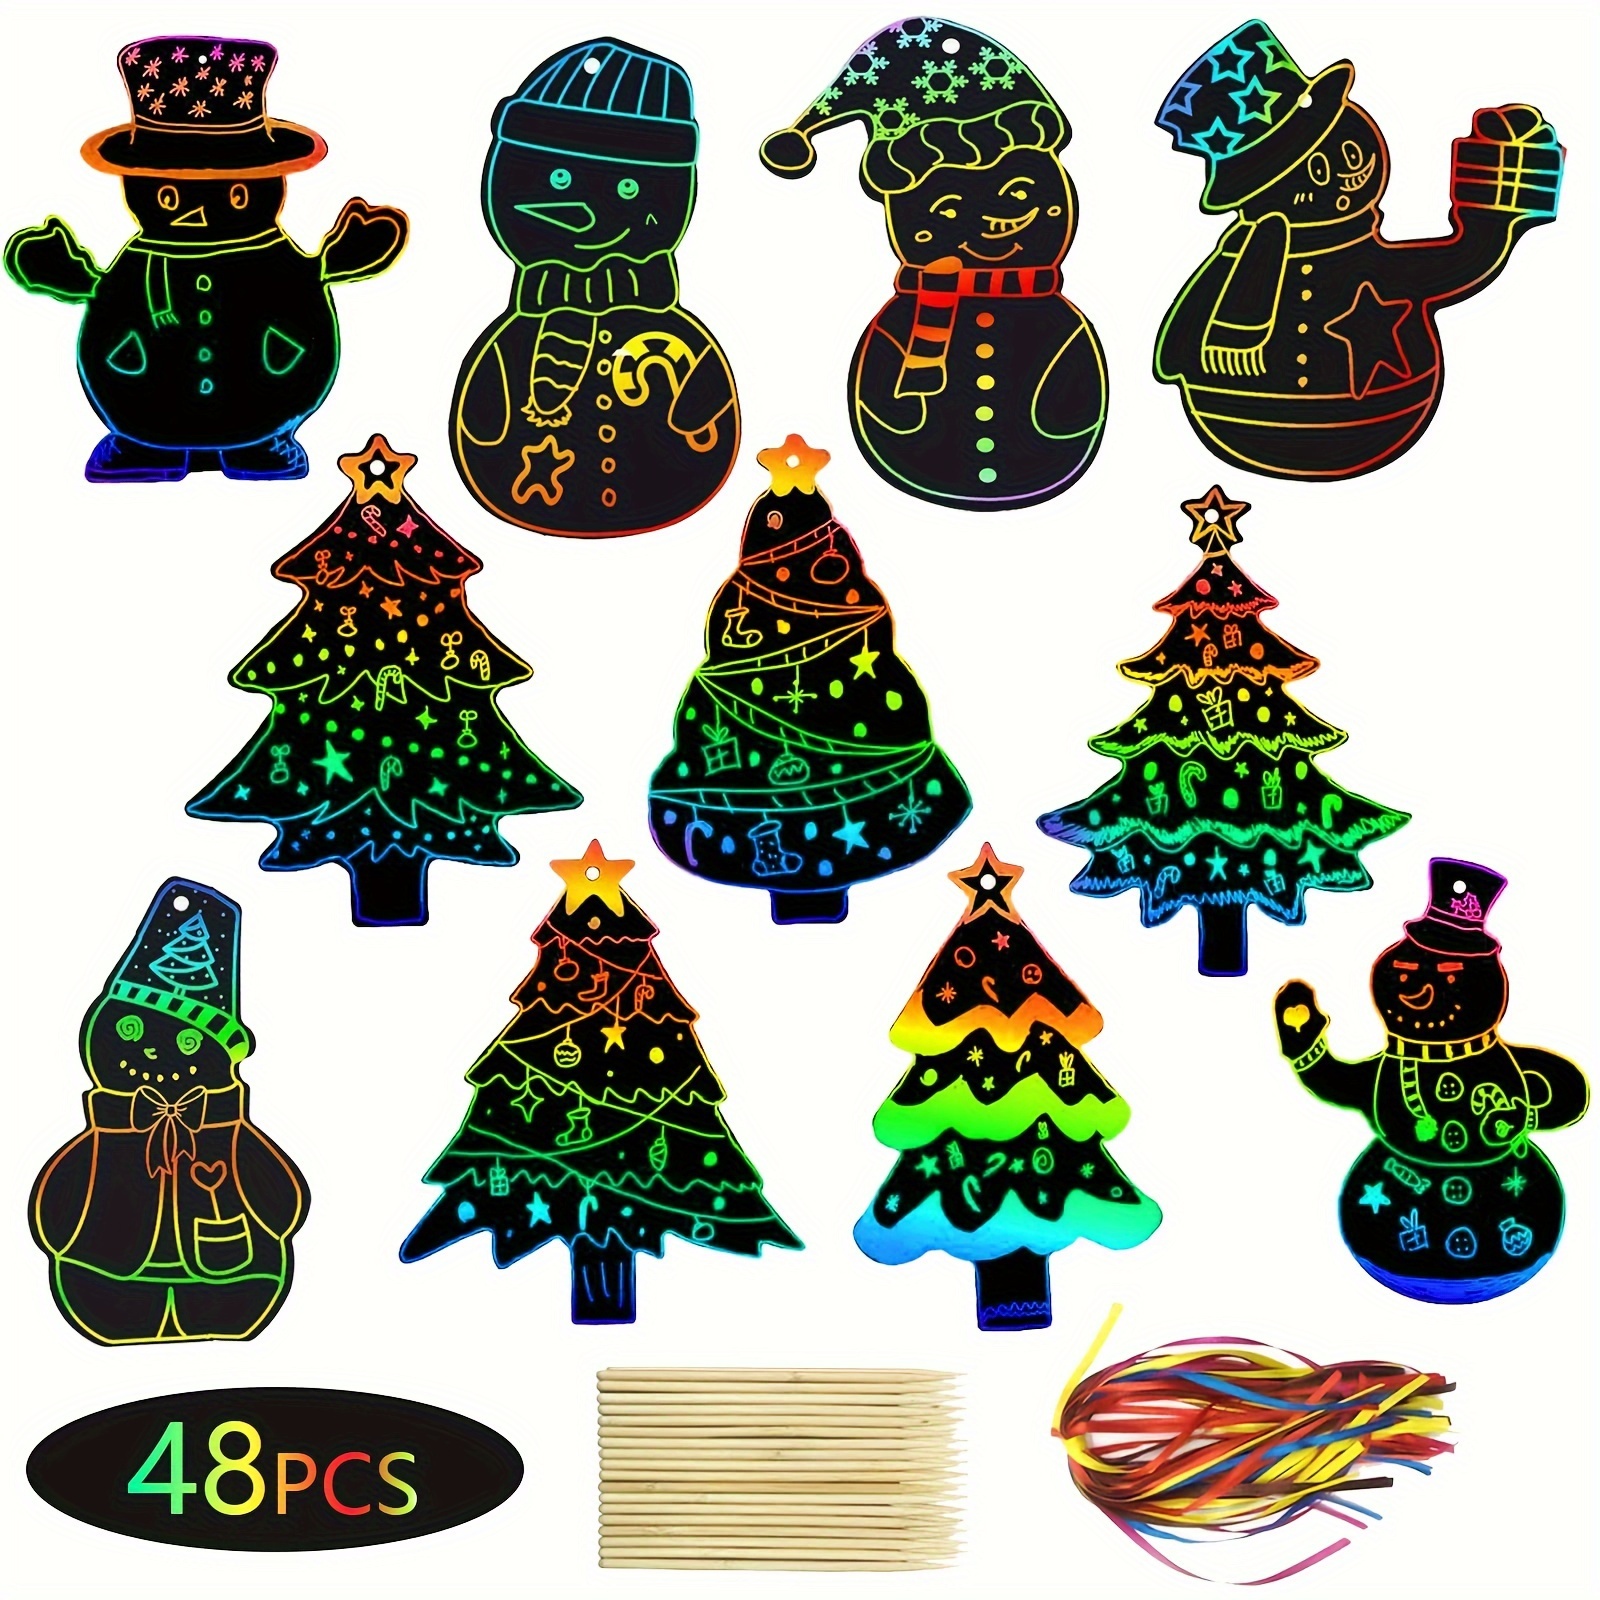 Scratch Art Party Favors 24packs Rainbow Scratch Notebook Art Supplies  Birthday Party Favors Christmas Gifts Classroom Prizes Goodie Bag Stuffers